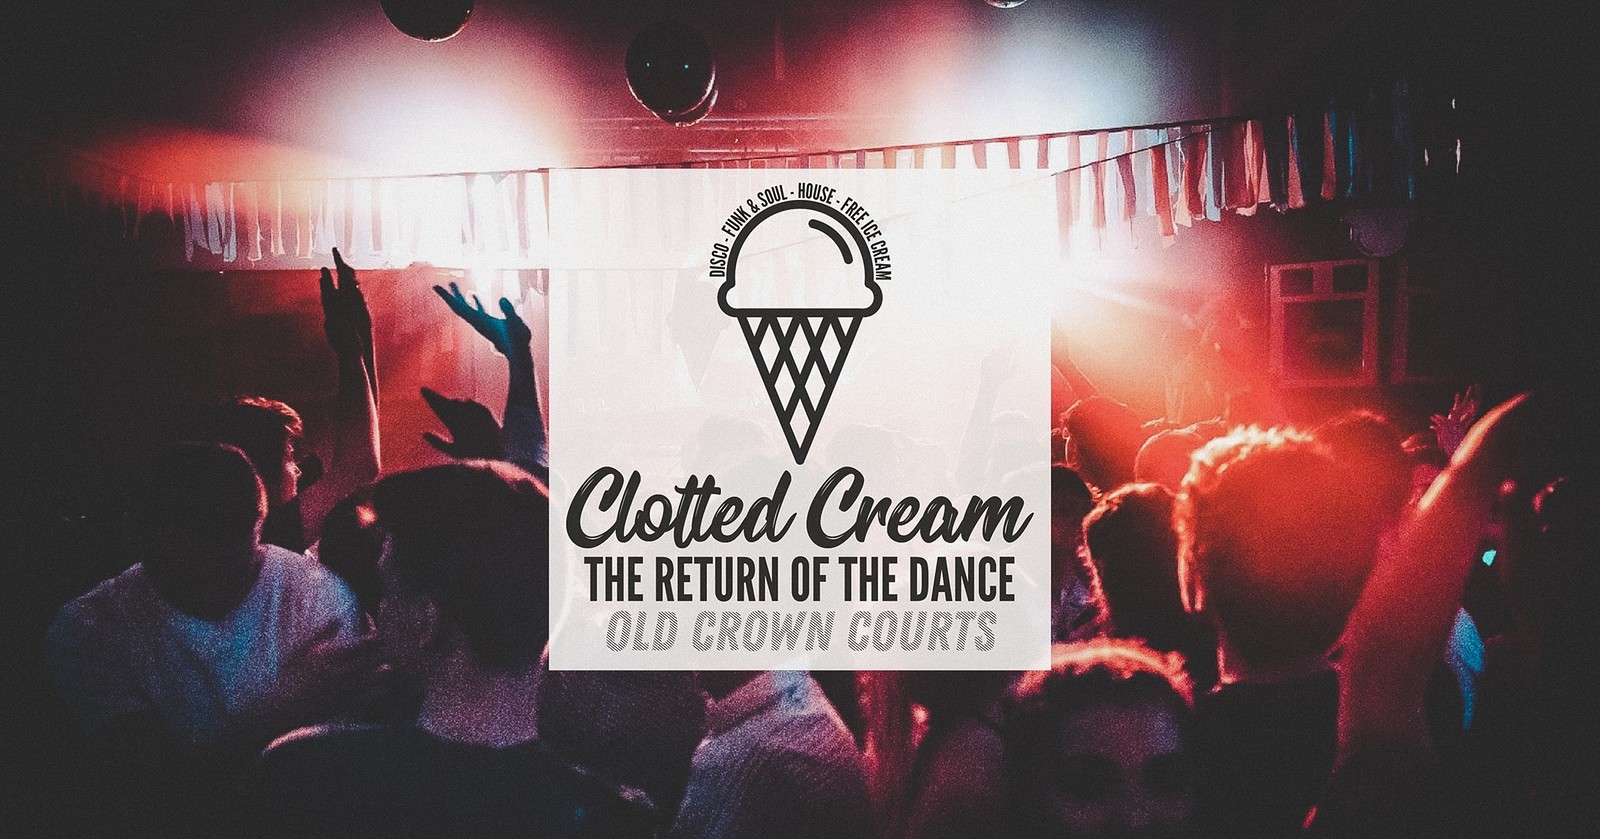 Clotted Cream: Return of the Dance at The Old Crown Courts